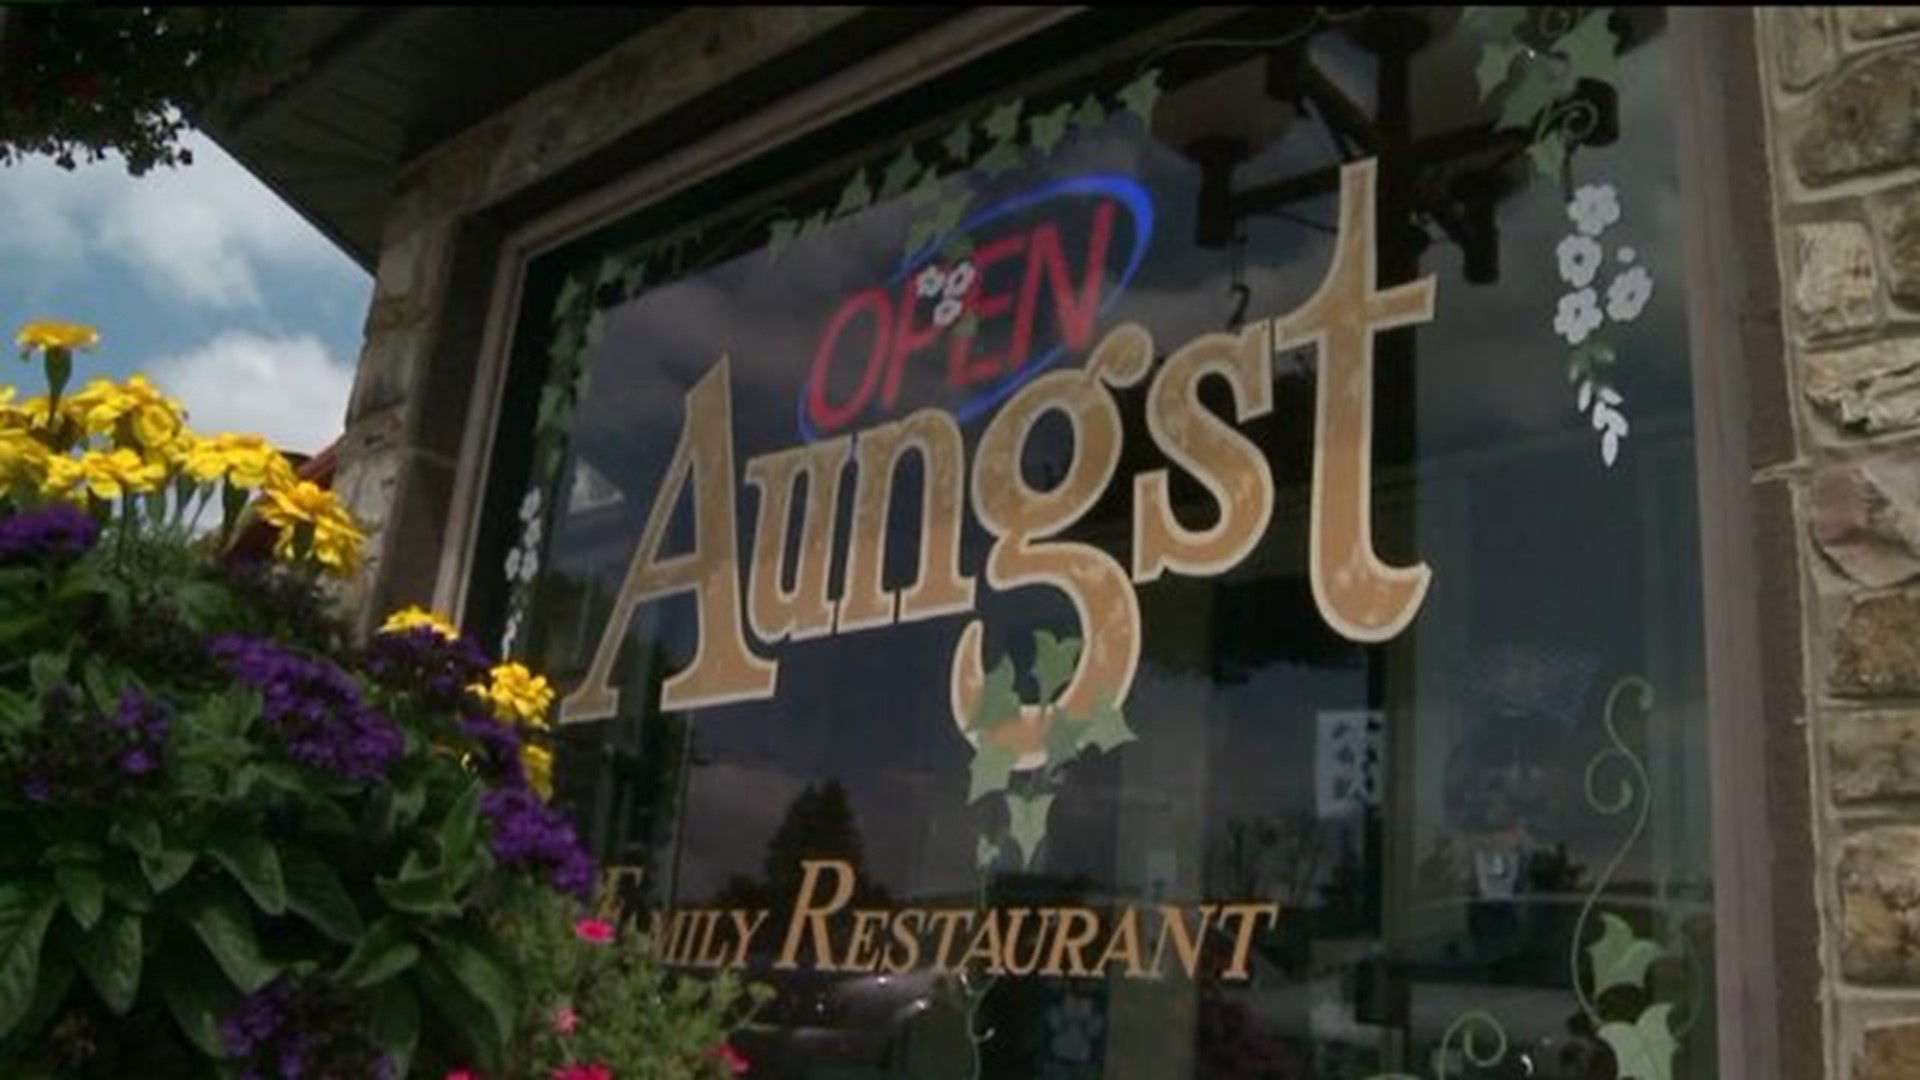 Restaurant Will Close if Owner Does Not Find Buyer